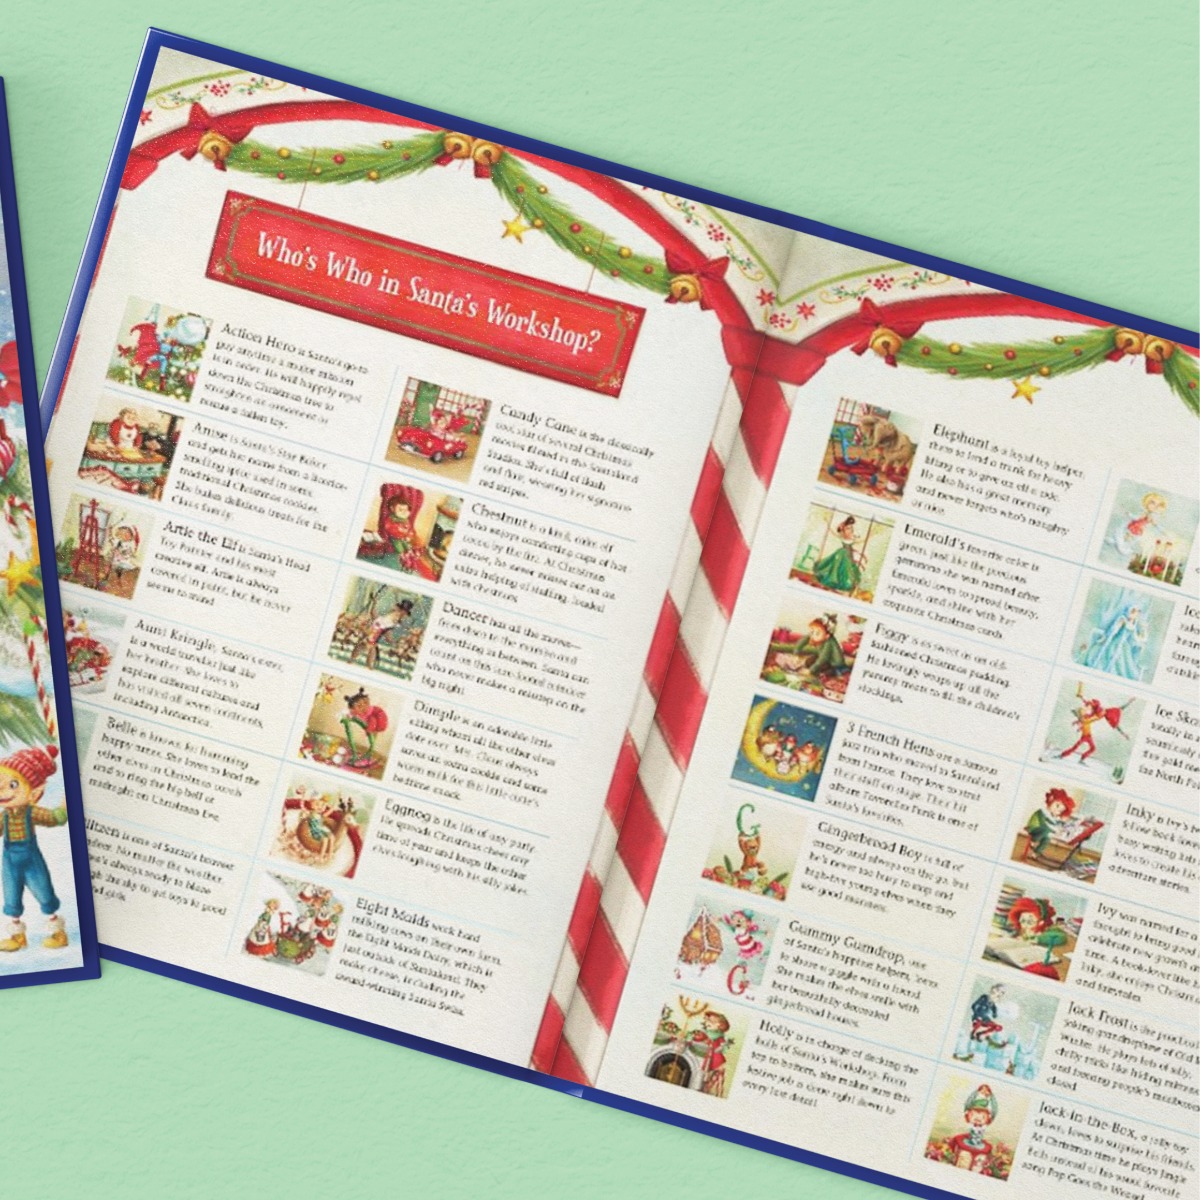 Personalized Christmas Books for Kids + Siblings [Plus a Giveaway!]